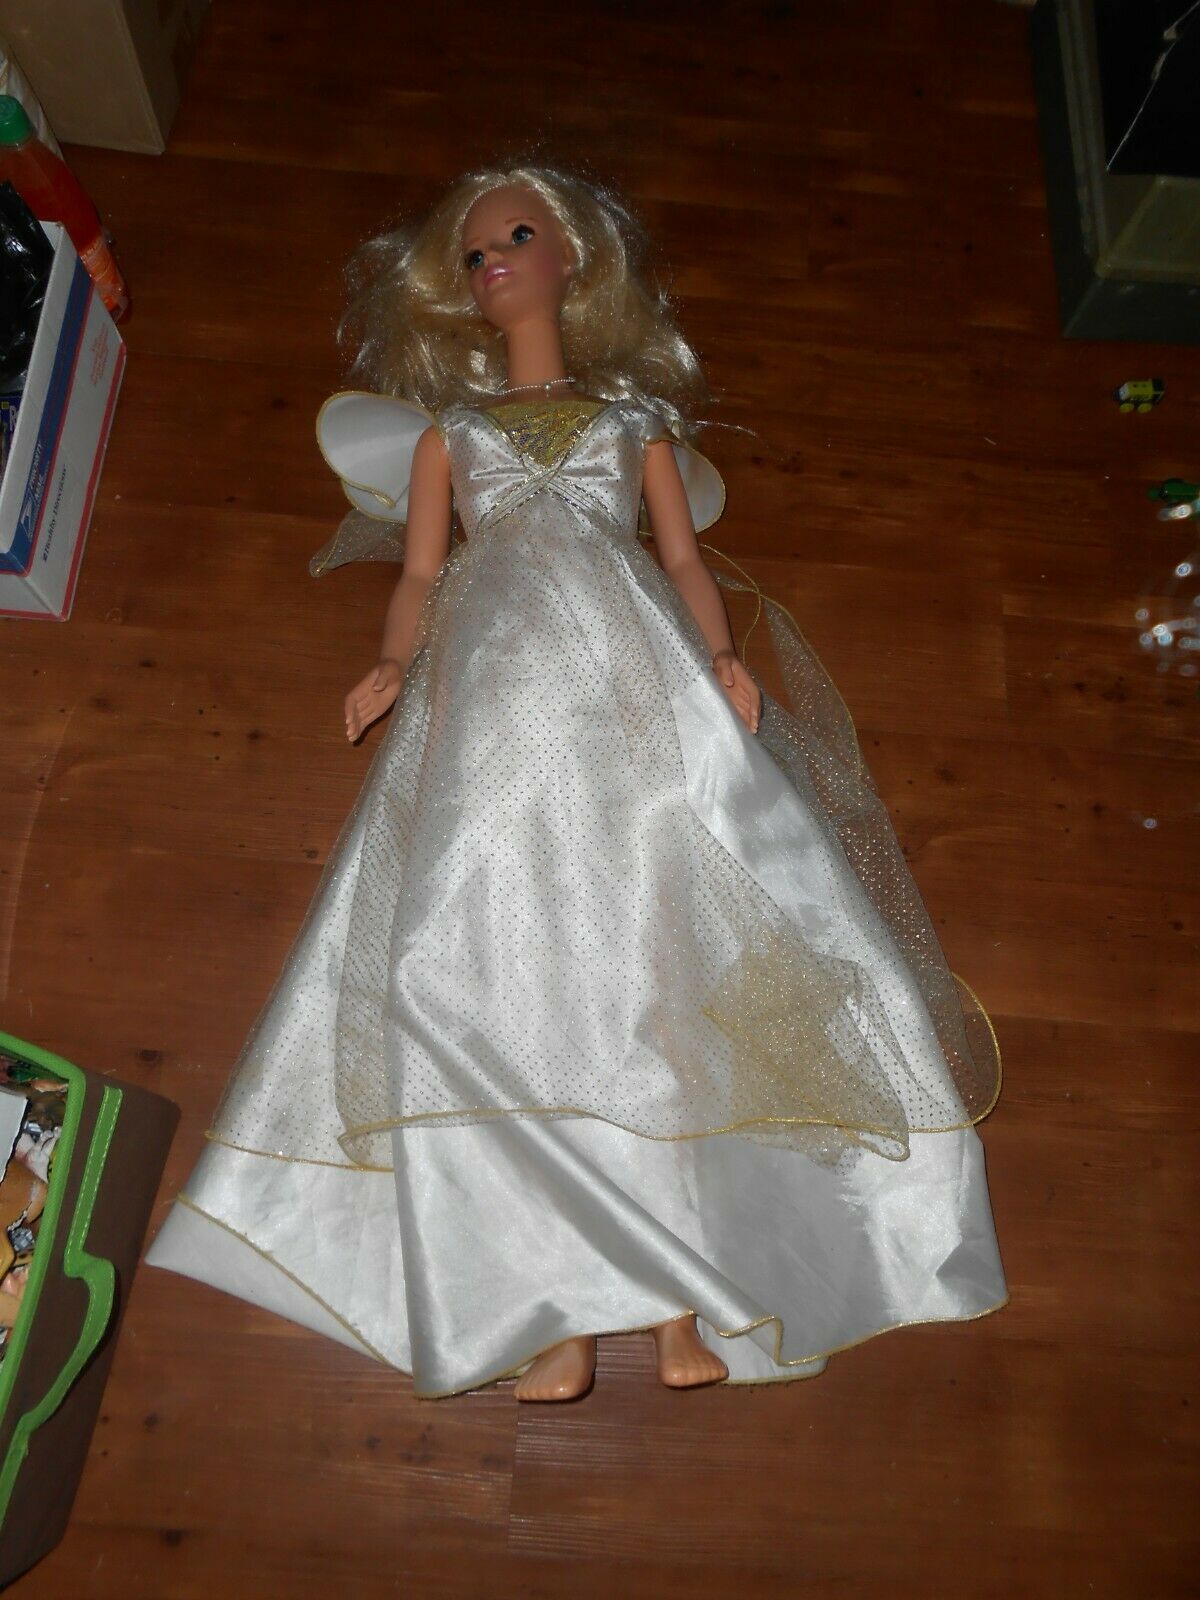 Life Size Barbie Doll 3 Feet Tall 1992 My Size Mattel Gown Crown